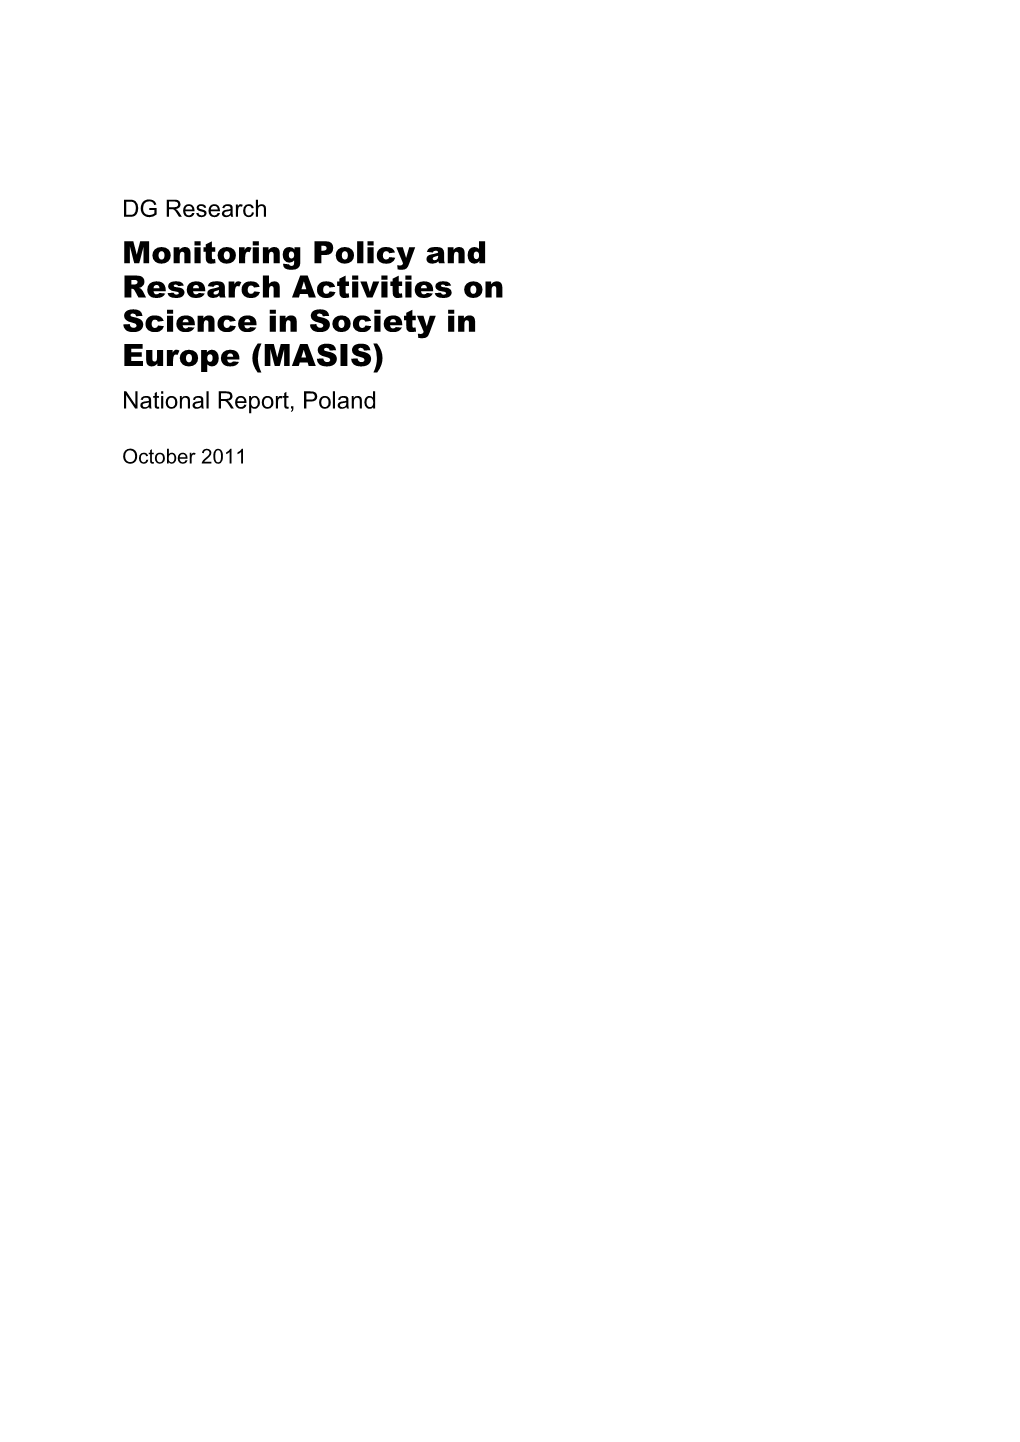 Monitoring Policy and Research Activities on Science in Society in Europe (MASIS) National Report, Poland